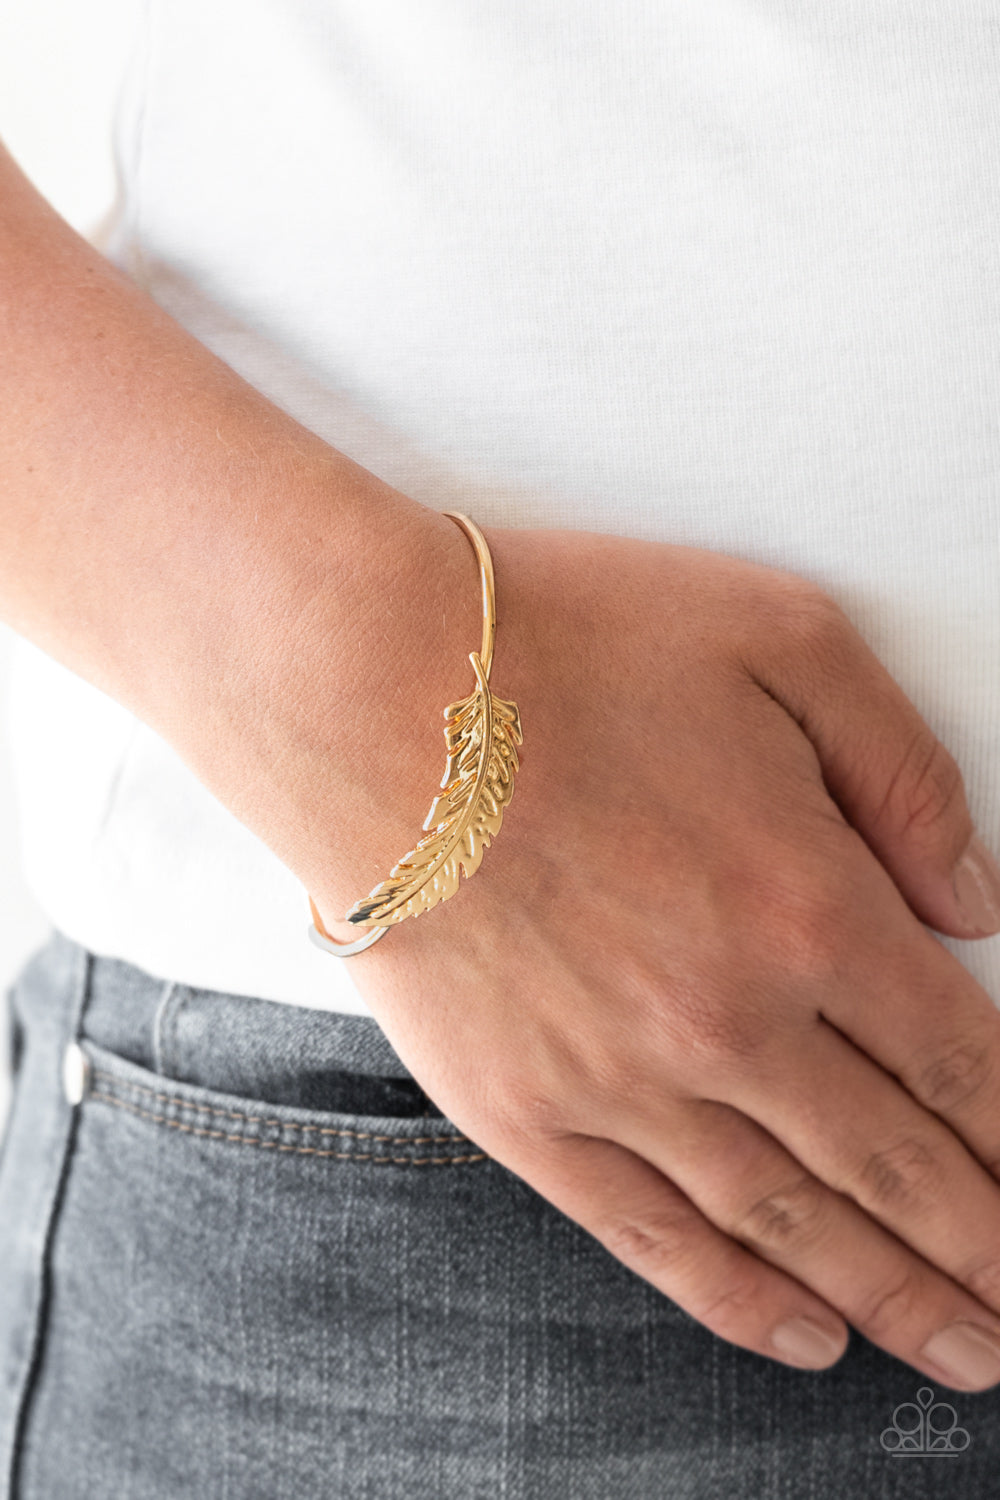 How Do You Like This FEATHER? Gold Bracelet